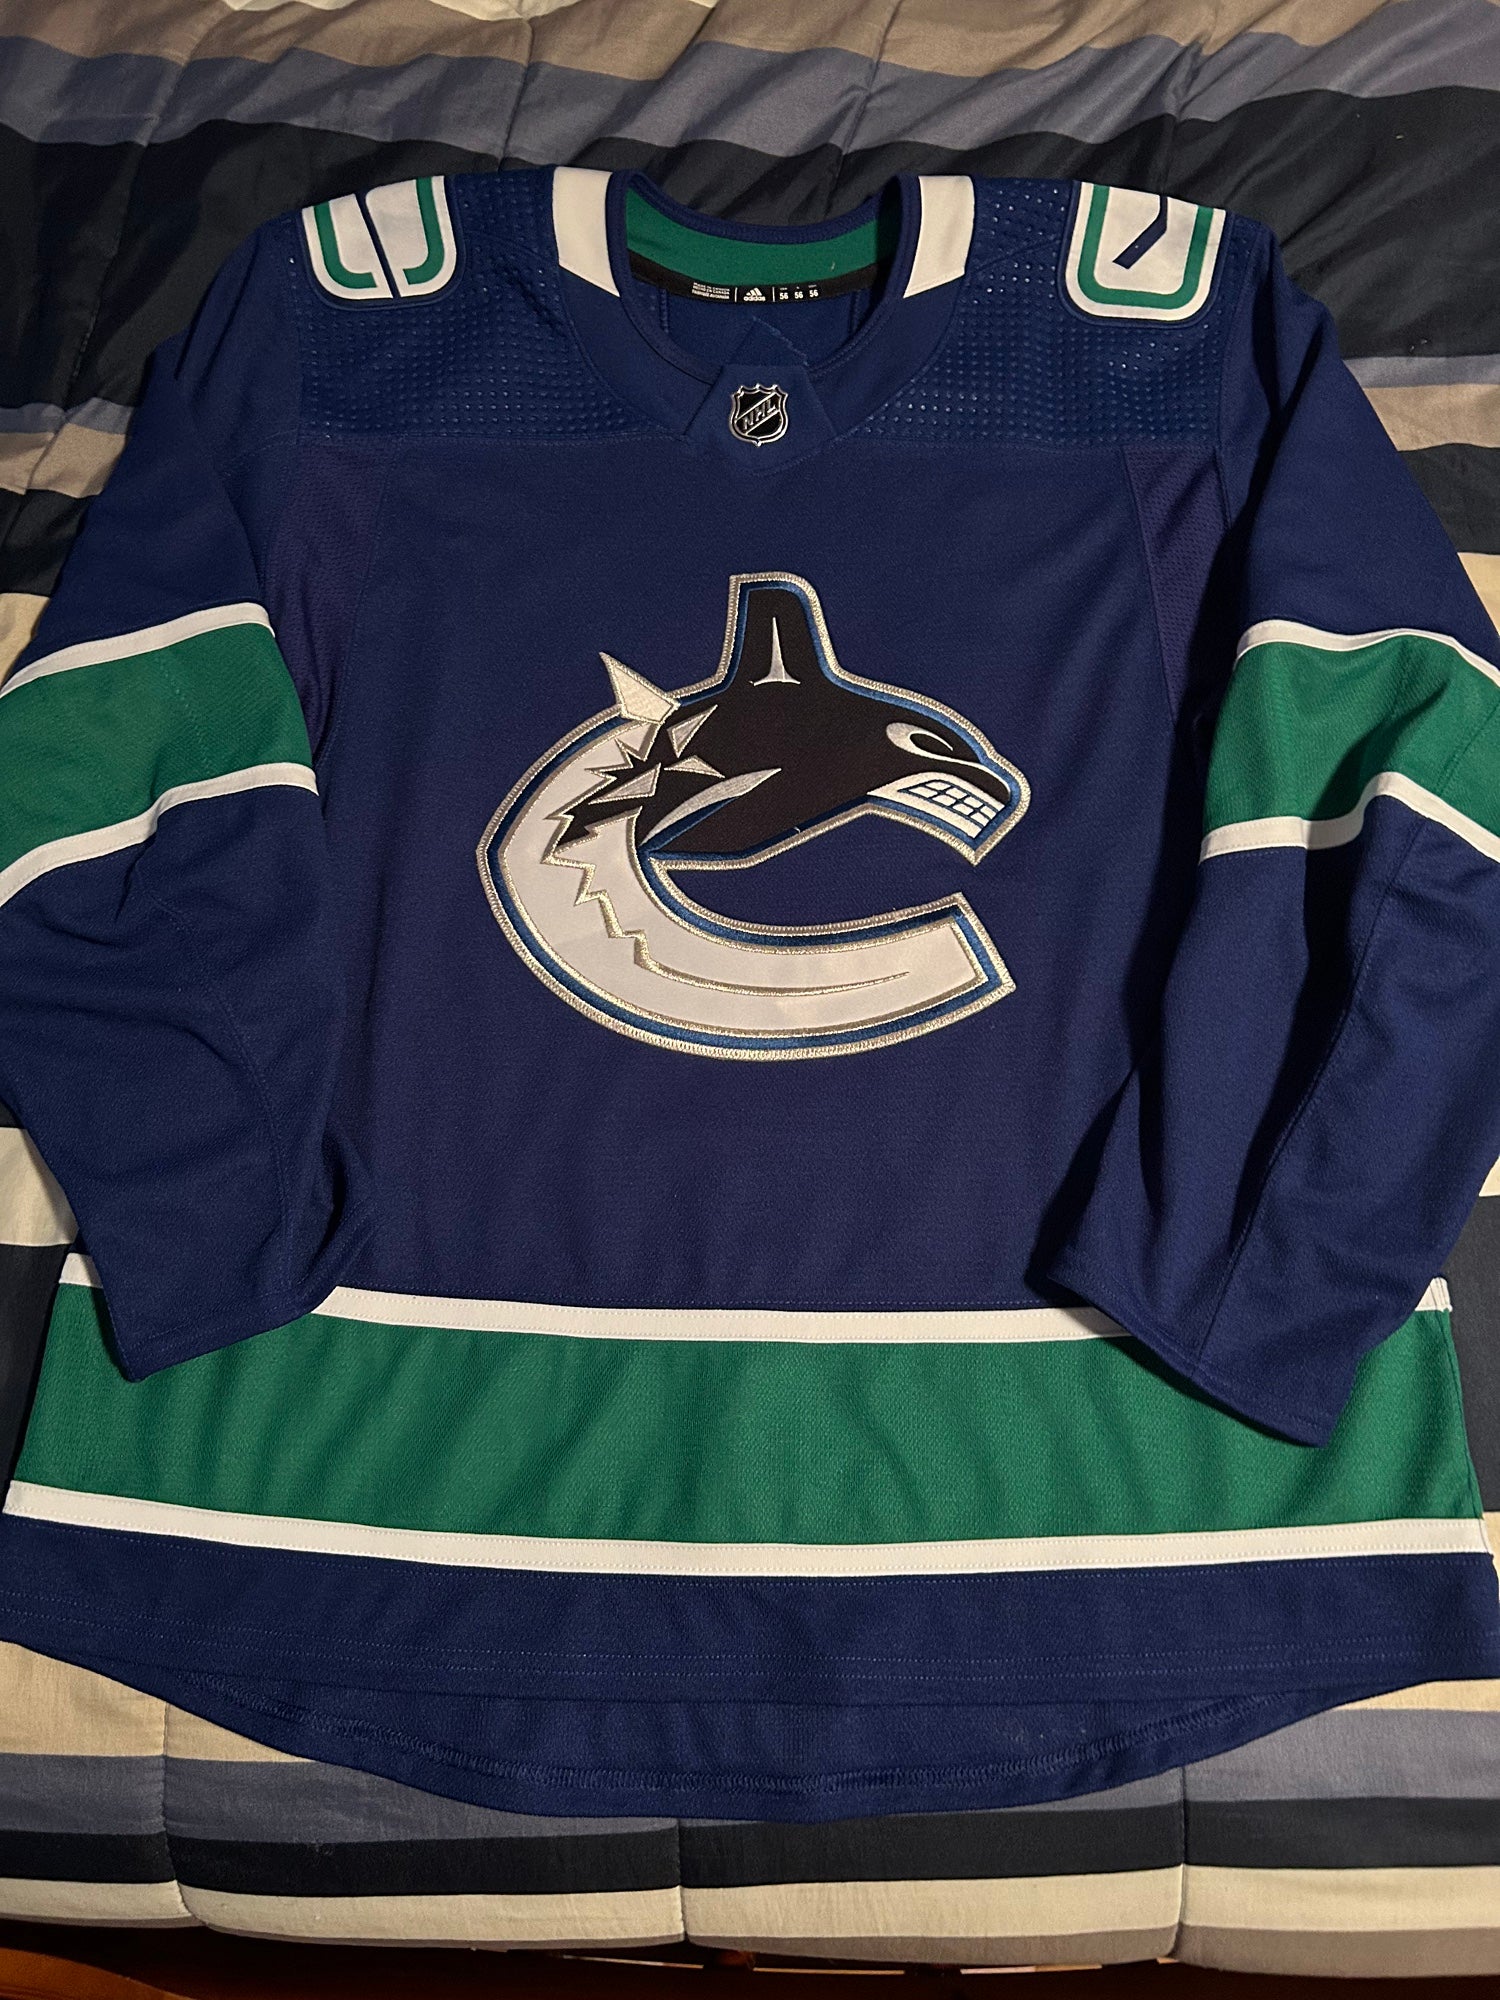 Vancouver+Canucks+Sz+46+Stick+and+Rink+3rd+adidas+NHL+Hockey+